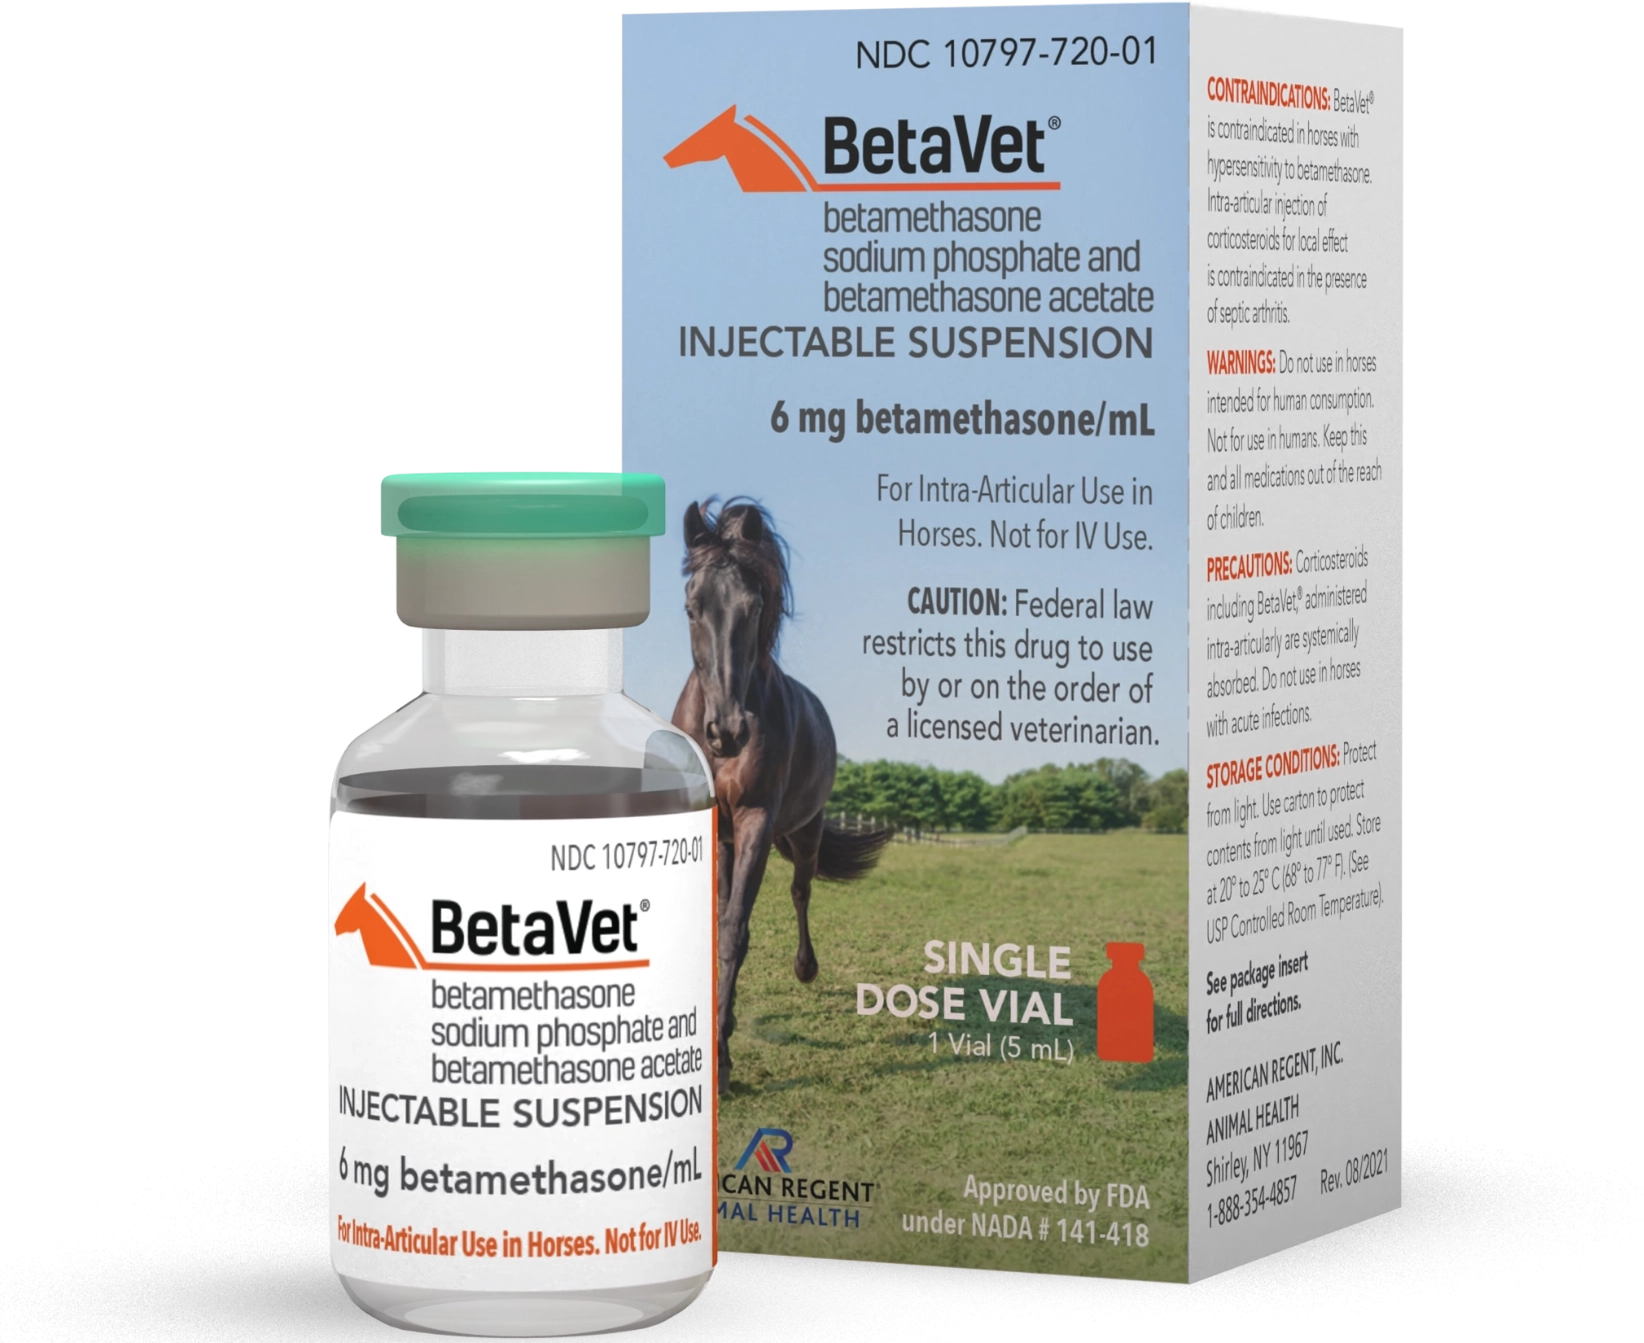 BetaVet® vial and box